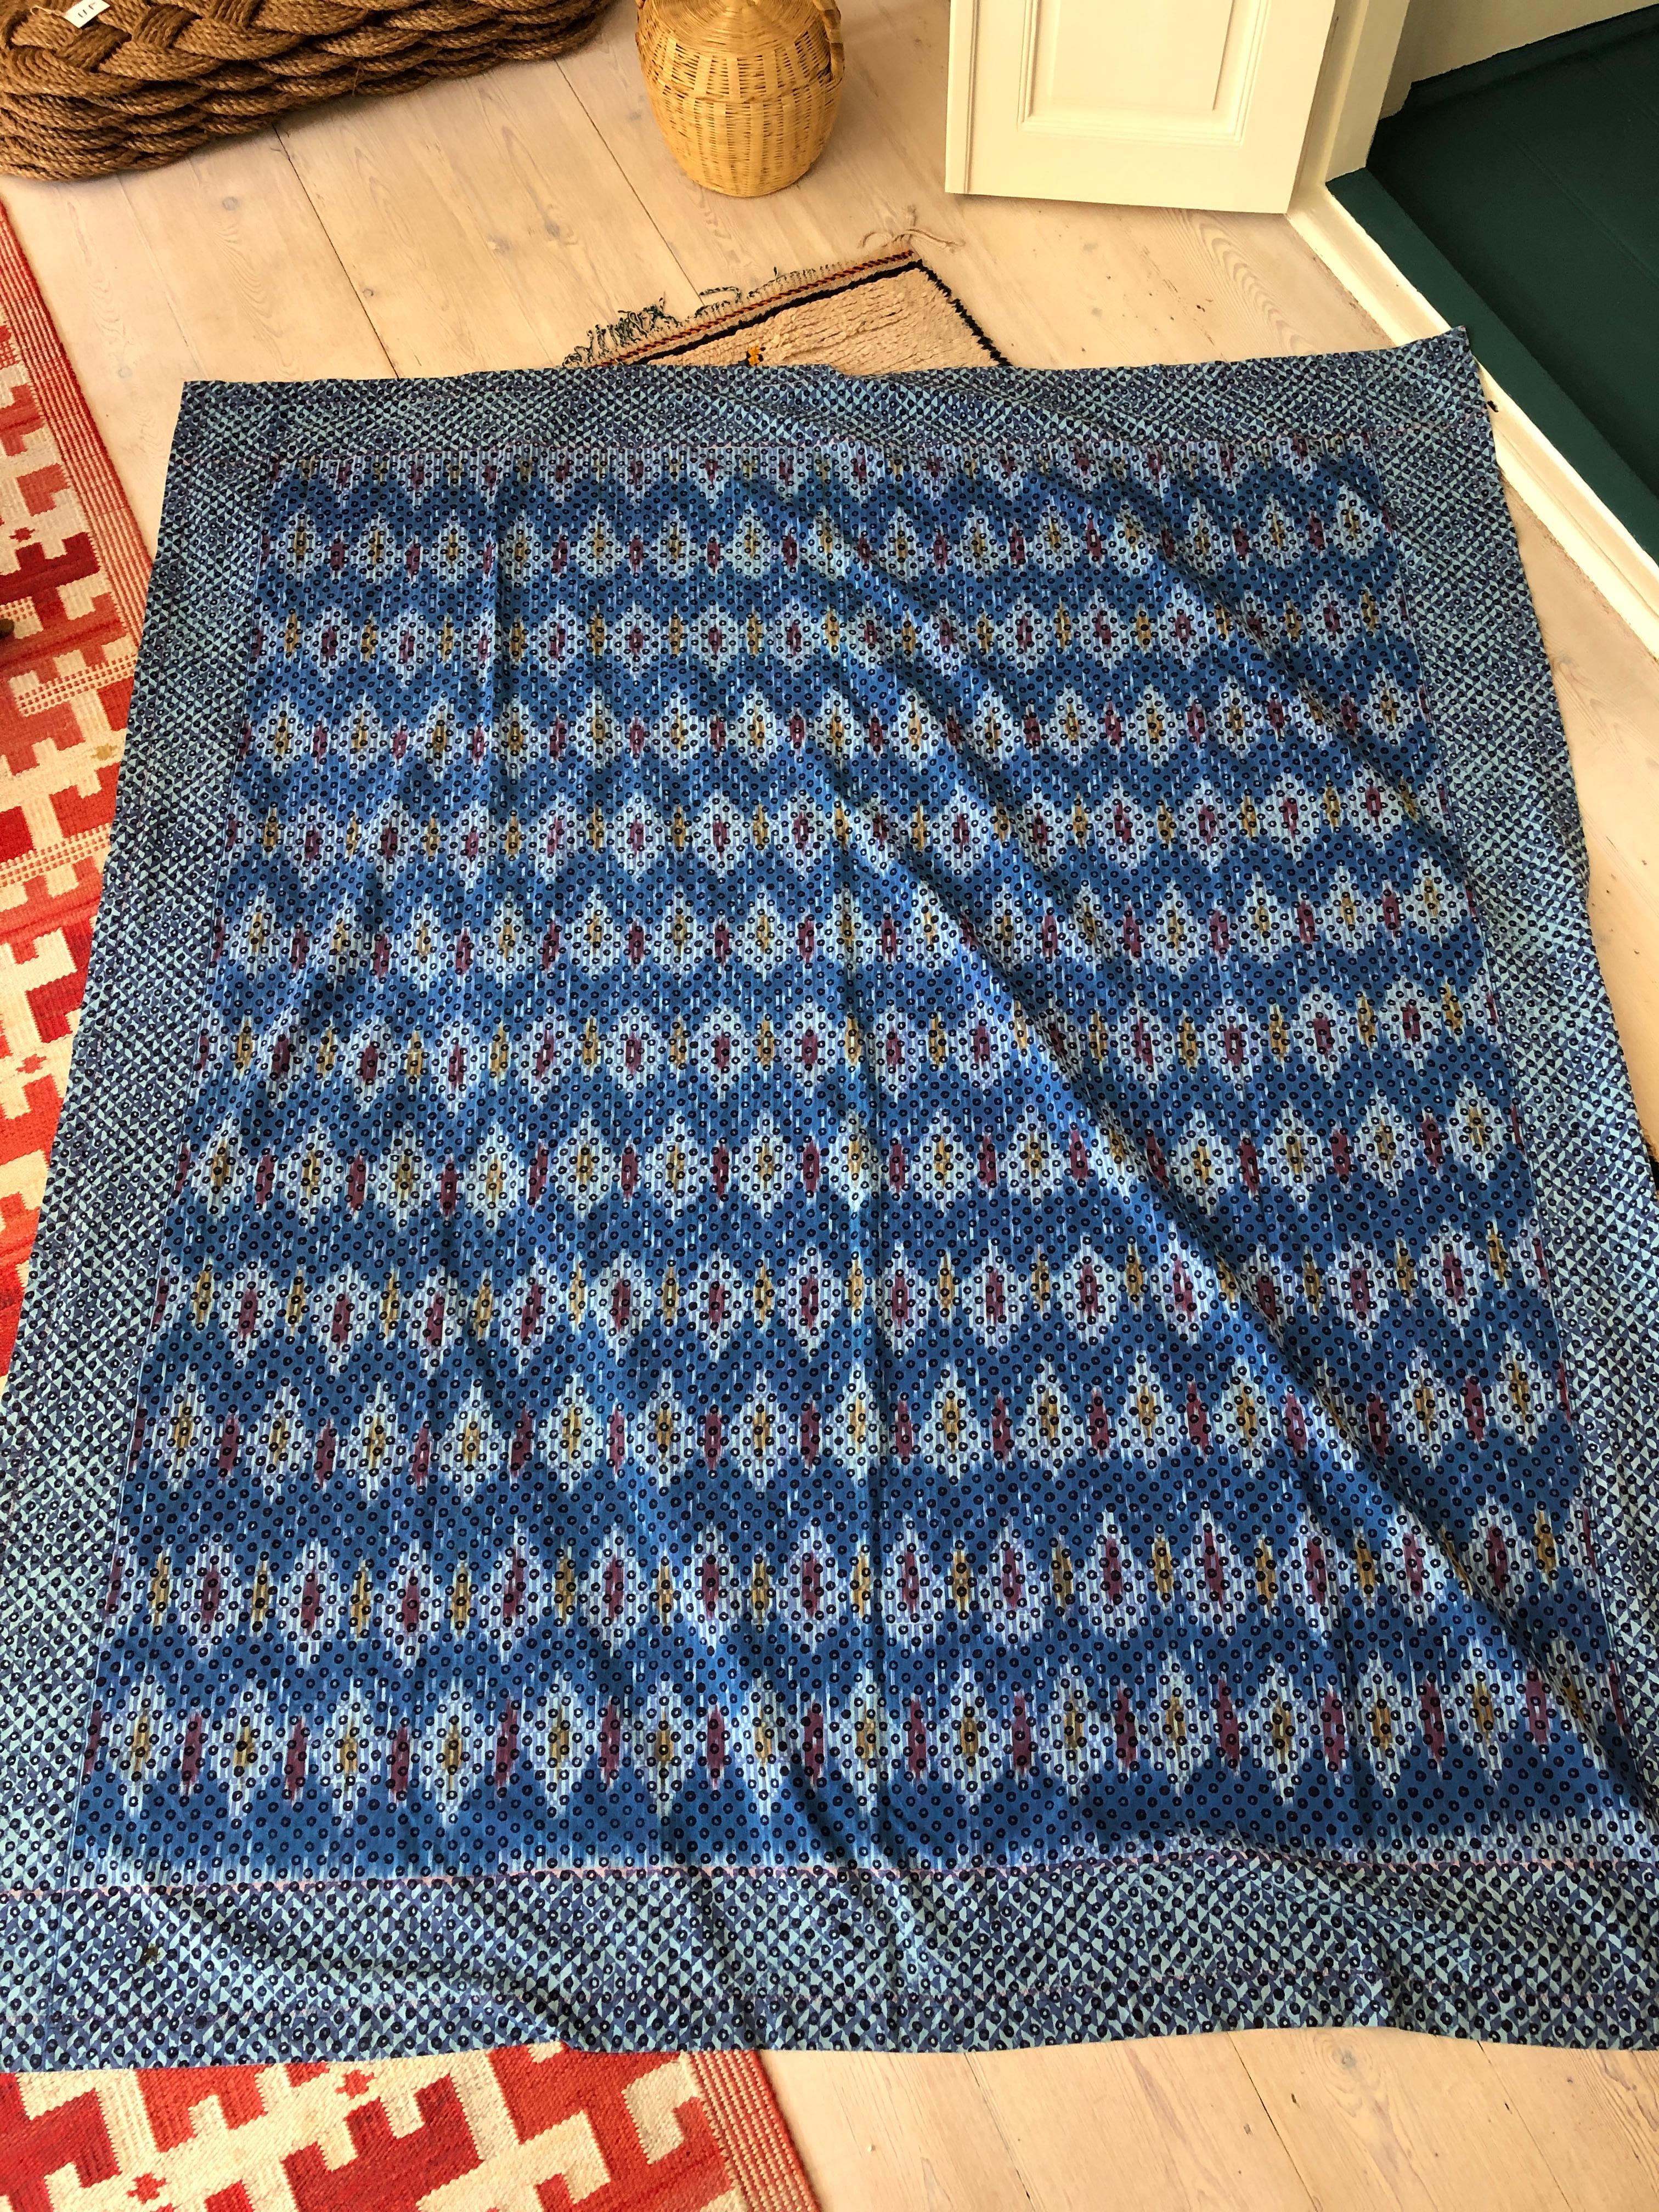 Contemporary Gregory Parkinson Tablecloth with Blue Ikat Hand-Blocked Patterns 3